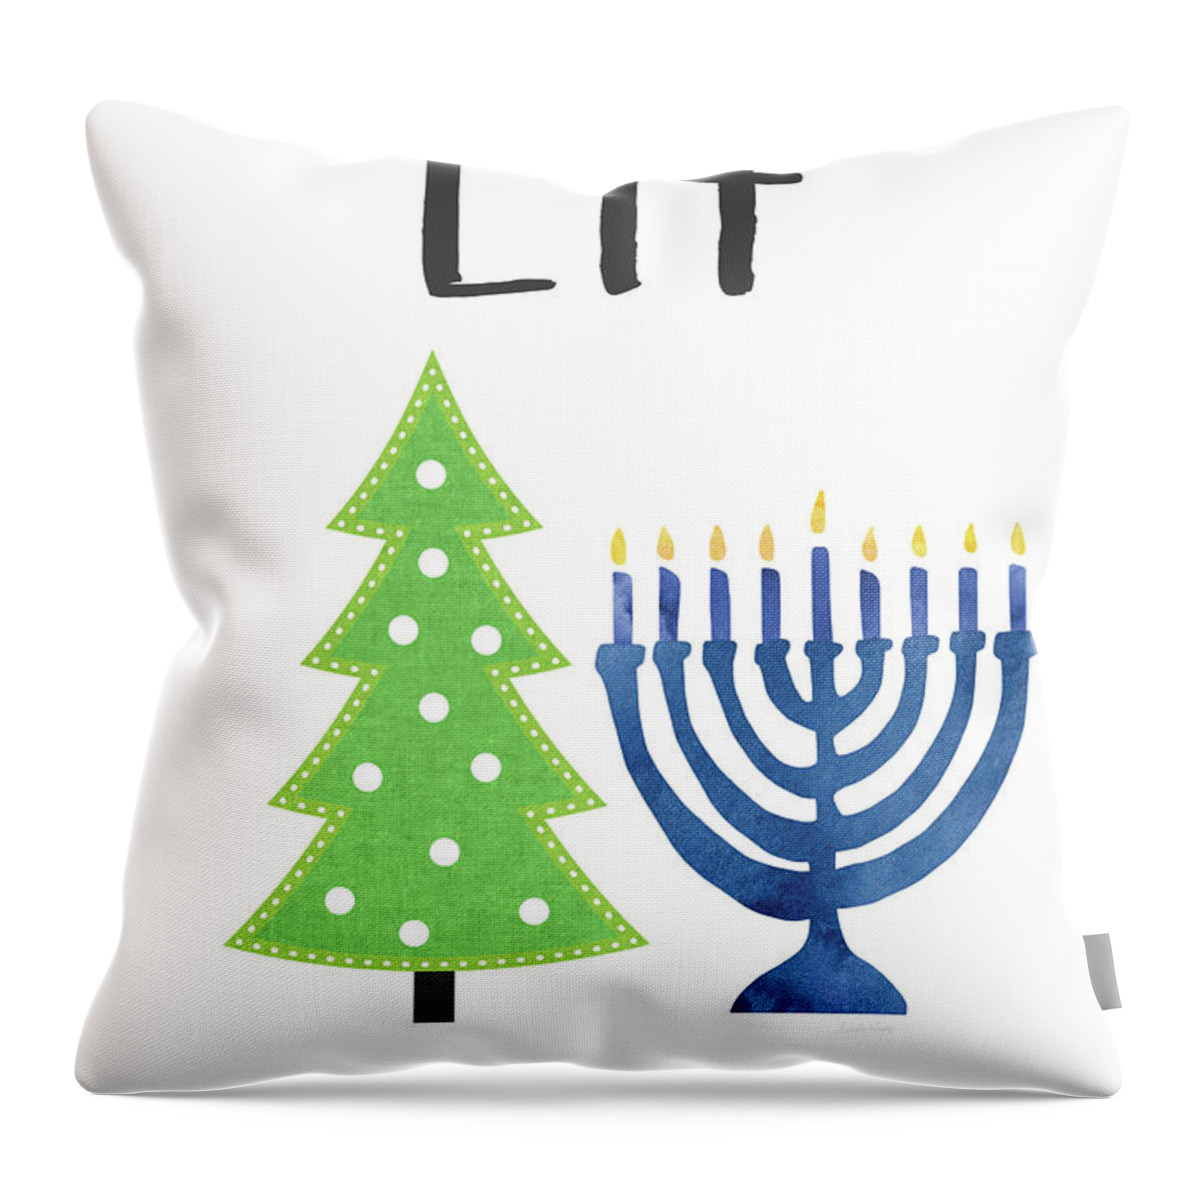 Christmas Throw Pillow featuring the digital art Lit Christmas And Hanukkah- Art by Linda Woods by Linda Woods